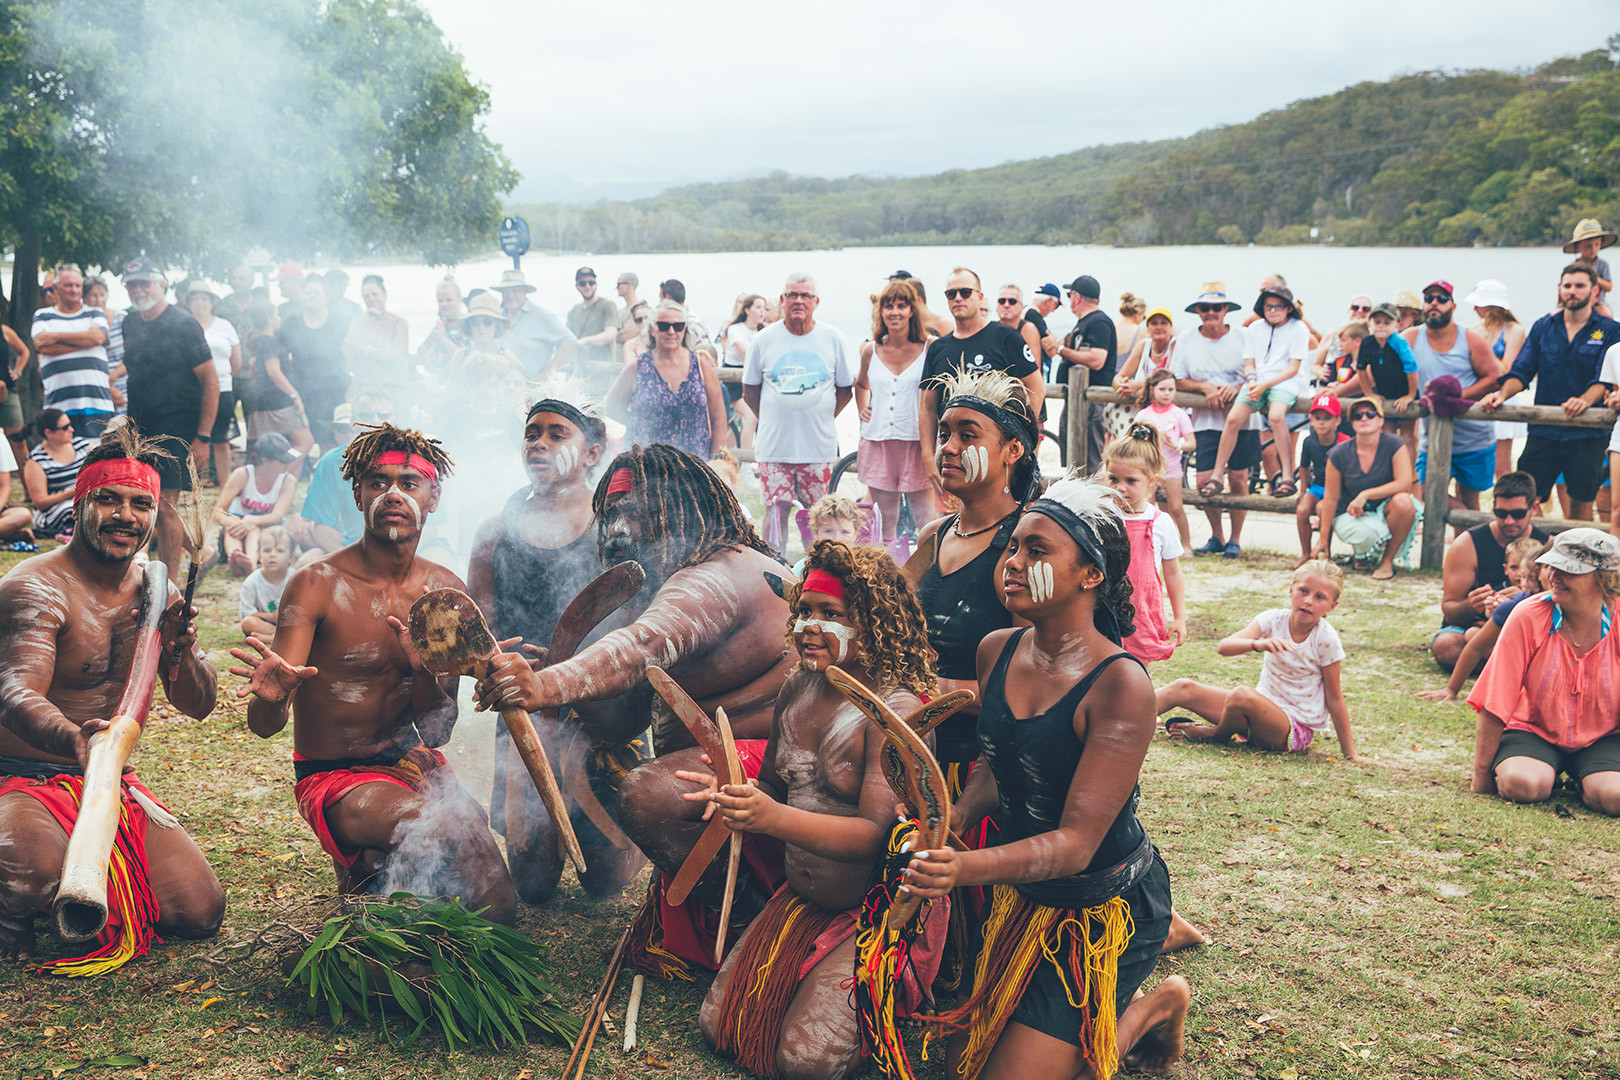 Aboriginal dancers posing at a smoking ceremony at Tallebudgera Creek Tourist Park. Guests of the park watching in the background.